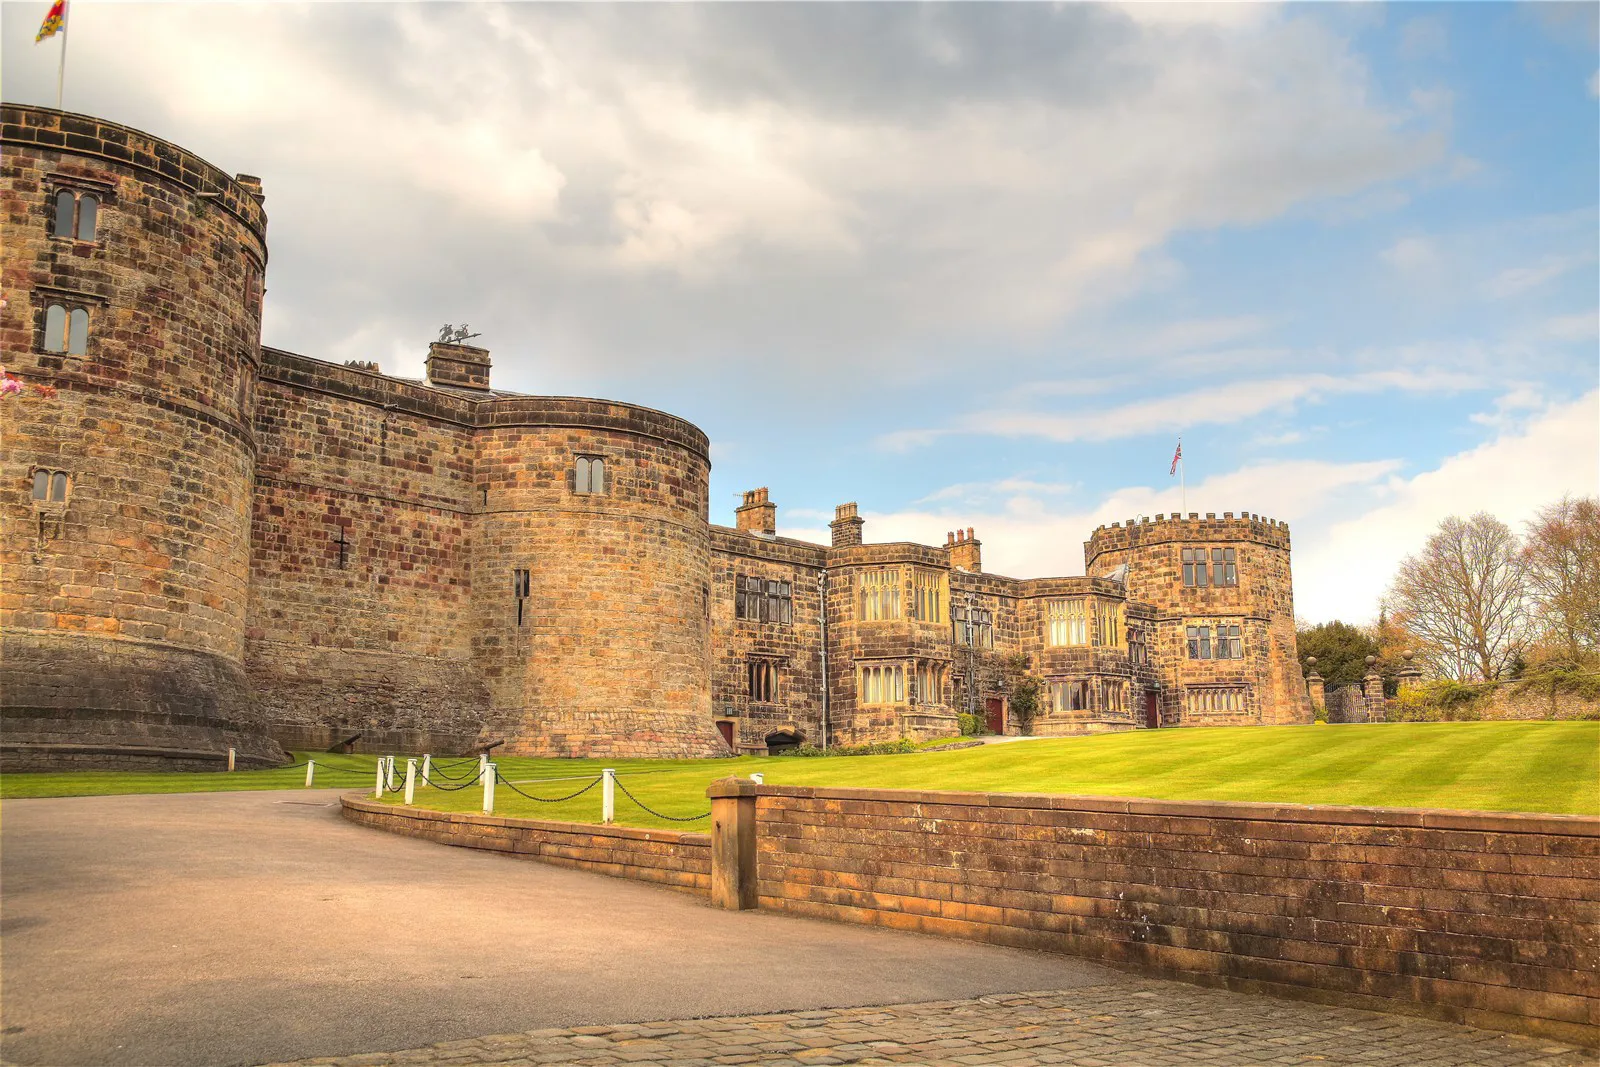 History uncovered: 5 fascinating castles in Yorkshire